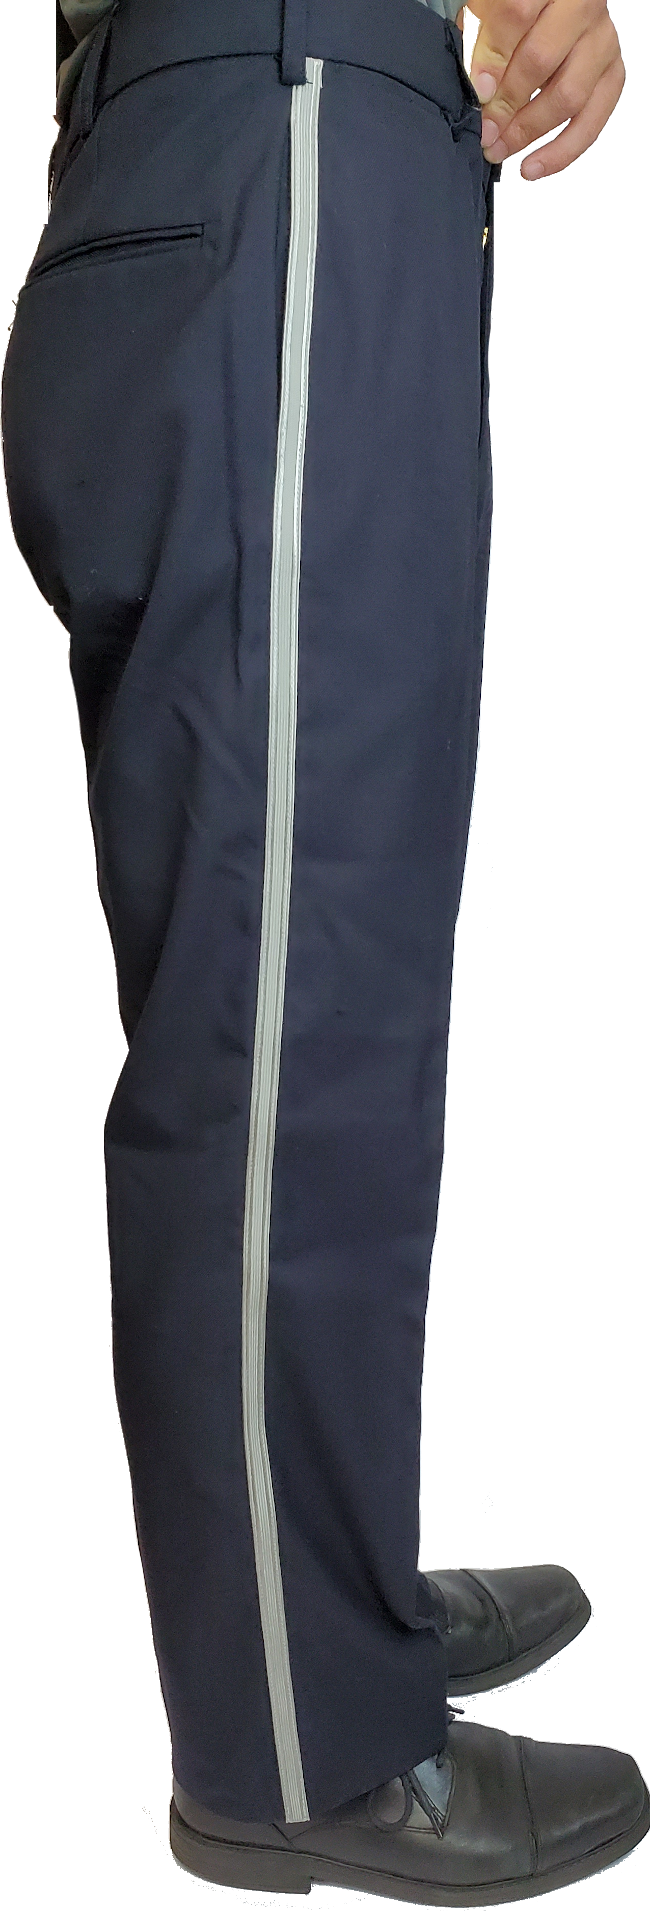 Wholesale navy blue uniform pants - Outfits And Military Accessories 